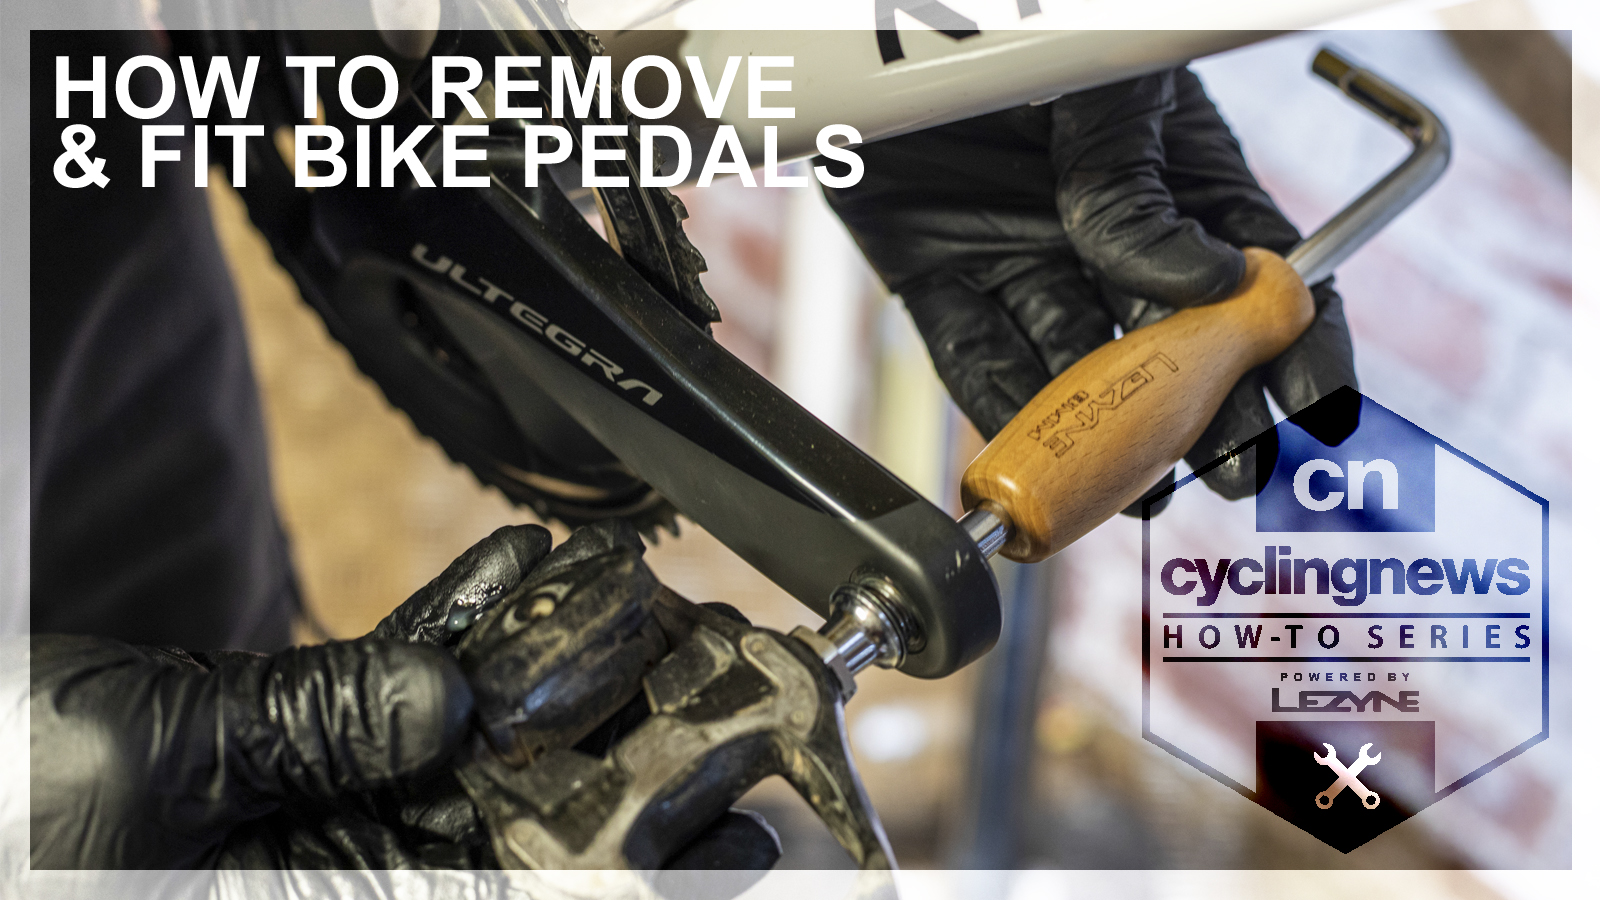 undoing bicycle pedals